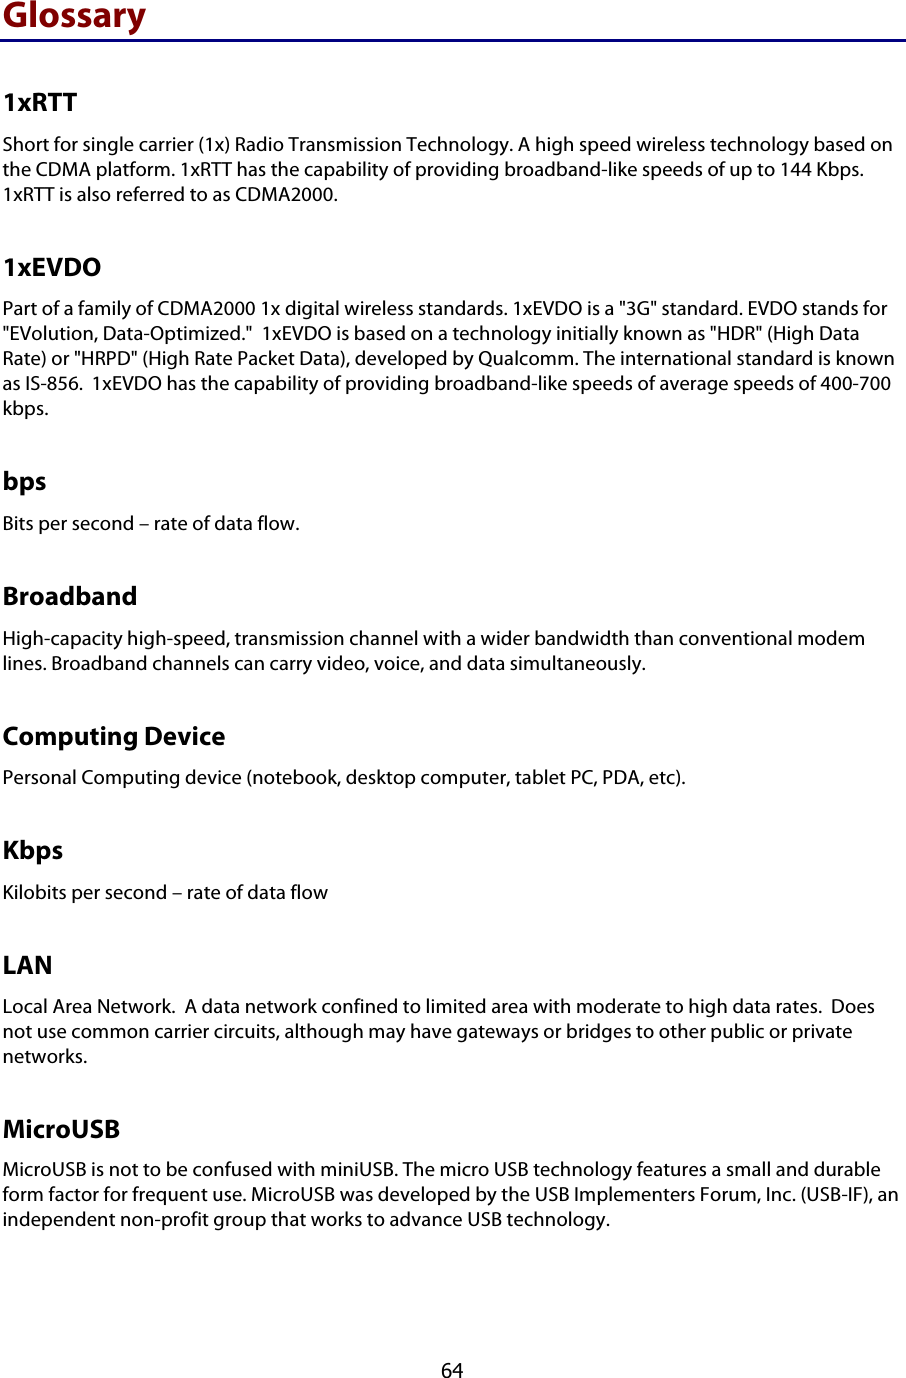  64 Glossary 1xRTT Short for single carrier (1x) Radio Transmission Technology. A high speed wireless technology based on the CDMA platform. 1xRTT has the capability of providing broadband-like speeds of up to 144 Kbps.  1xRTT is also referred to as CDMA2000. 1xEVDO Part of a family of CDMA2000 1x digital wireless standards. 1xEVDO is a &quot;3G&quot; standard. EVDO stands for &quot;EVolution, Data-Optimized.&quot;  1xEVDO is based on a technology initially known as &quot;HDR&quot; (High Data Rate) or &quot;HRPD&quot; (High Rate Packet Data), developed by Qualcomm. The international standard is known as IS-856.  1xEVDO has the capability of providing broadband-like speeds of average speeds of 400-700 kbps.   bps Bits per second – rate of data flow. Broadband High-capacity high-speed, transmission channel with a wider bandwidth than conventional modem lines. Broadband channels can carry video, voice, and data simultaneously.  Computing Device Personal Computing device (notebook, desktop computer, tablet PC, PDA, etc). Kbps Kilobits per second – rate of data flow LAN Local Area Network.  A data network confined to limited area with moderate to high data rates.  Does not use common carrier circuits, although may have gateways or bridges to other public or private networks. MicroUSB MicroUSB is not to be confused with miniUSB. The micro USB technology features a small and durable form factor for frequent use. MicroUSB was developed by the USB Implementers Forum, Inc. (USB-IF), an independent non-profit group that works to advance USB technology. 